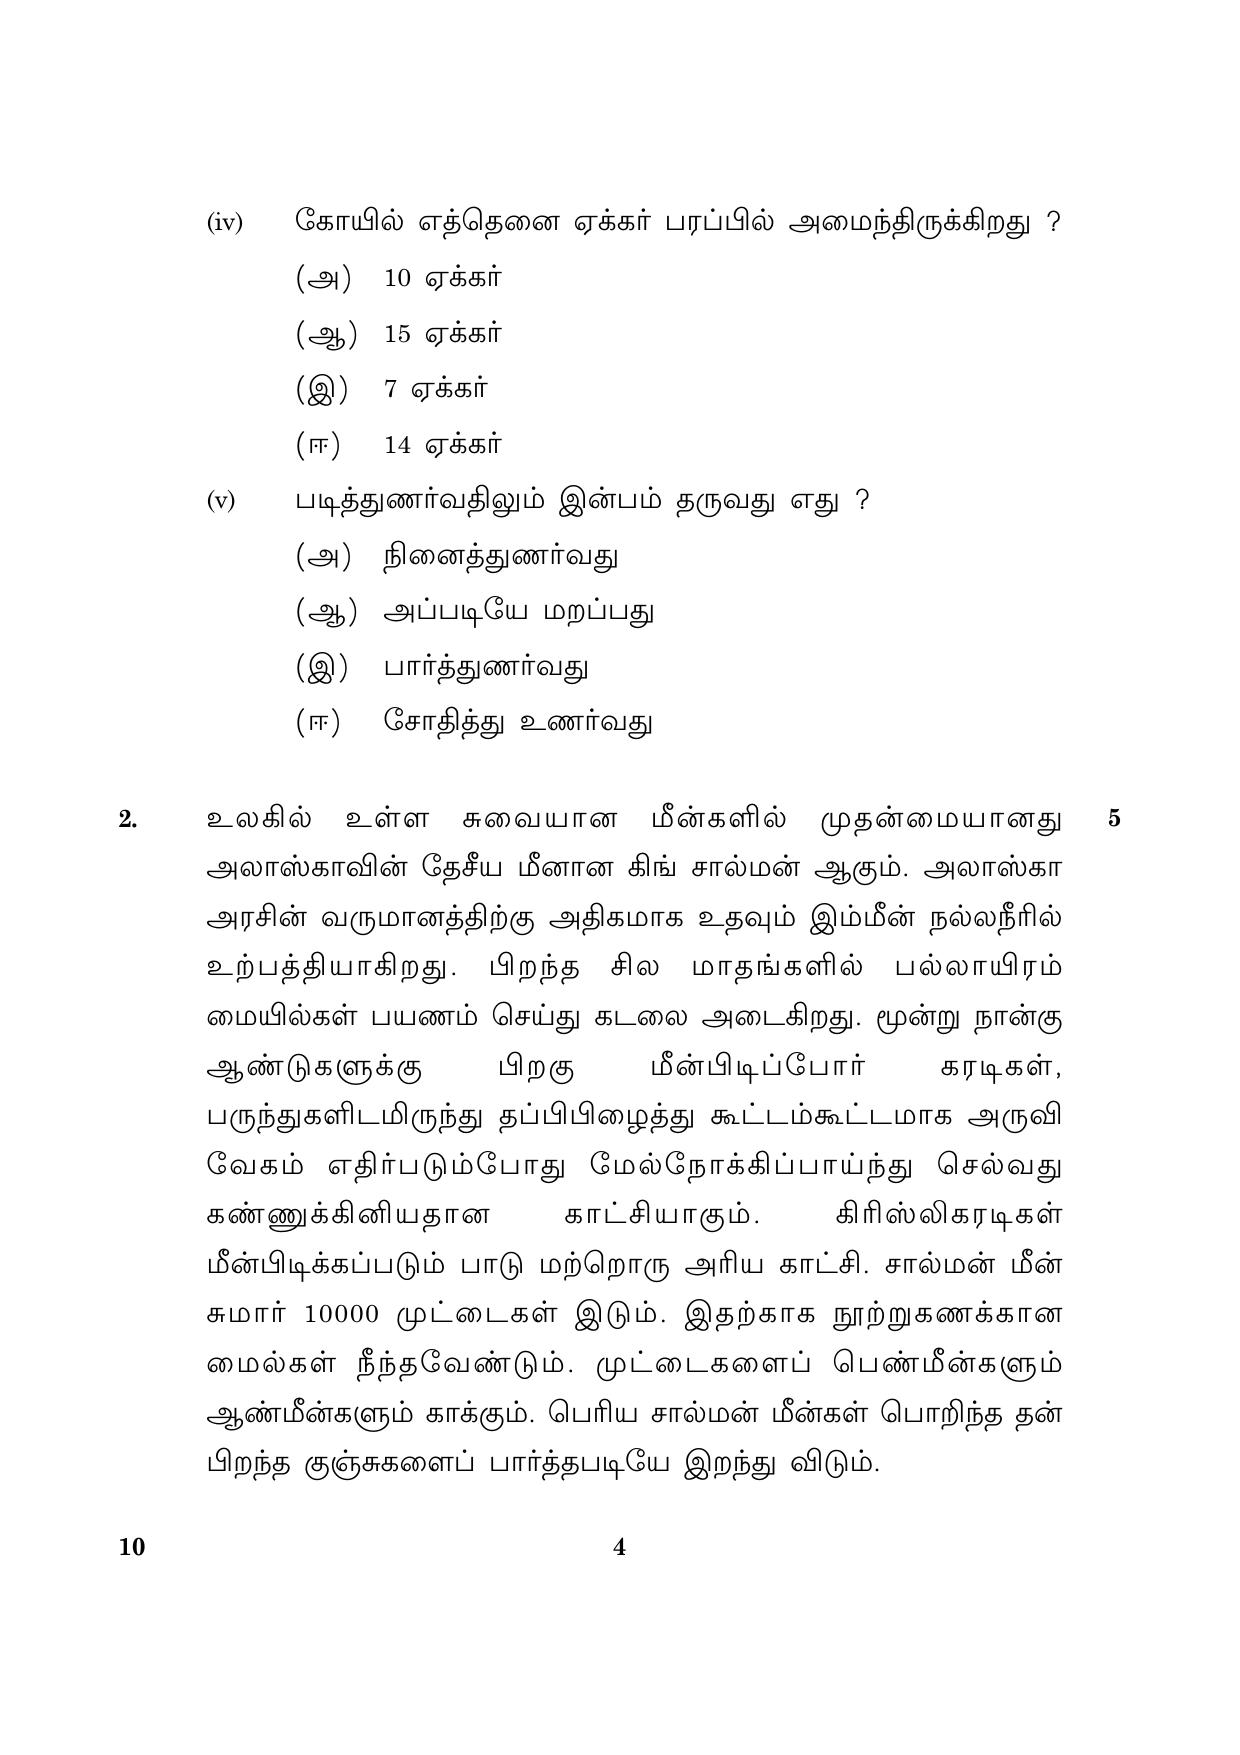 CBSE Class 10 010 Tamil 2016 Question Paper - Page 4